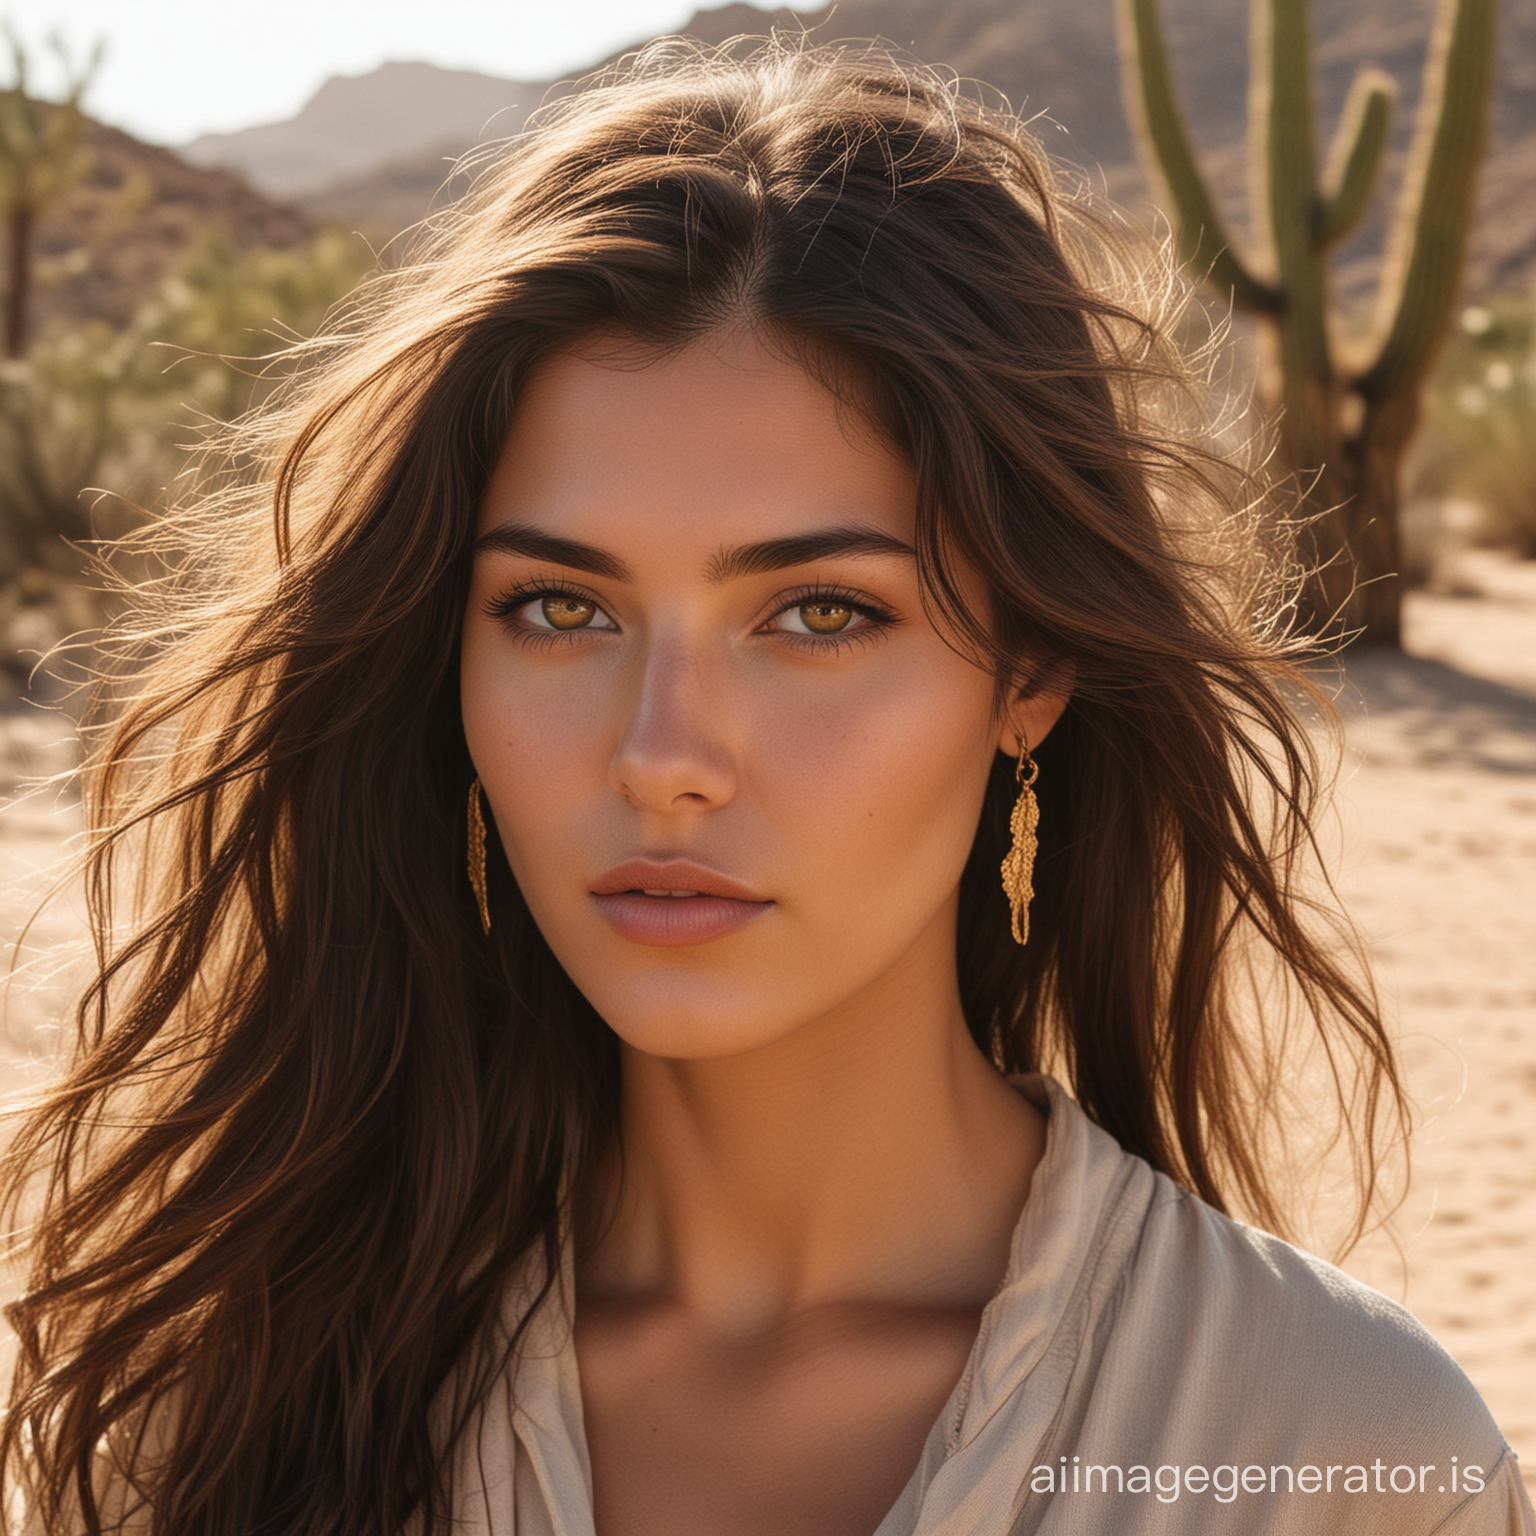 Amidst the harsh yet captivating landscape of the desert, there stood a woman whose beauty was as striking as the dawn breaking over the horizon. Her long, dark brown hair cascaded in waves, framing her face with an enchanting allure that captivated all who beheld her. But it was her eyes that truly mesmerized, their hue reminiscent of the desert itself—warm and earthy, with flecks of amber and gold that seemed to dance in the sunlight.

In the midst of the arid terrain, her features radiated a timeless elegance that transcended the harshness of her surroundings. A soft, serene smile graced her lips, imbued with a quiet confidence that spoke of inner strength and resilience.

With each step she took, she moved with a grace that defied the unforgiving nature of the desert, her presence a beacon of beauty amidst the vast expanse of sand and cacti. She was a vision of enchantment, a testament to the enduring allure of the human spirit in the face of adversity.

In her, there was a beauty that went beyond mere appearance—a beauty that resonated deep within the soul, leaving an indelible impression on all who crossed her path. She was the desert's hidden gem, its radiant jewel amidst the sands, a reminder that even in the harshest of landscapes, beauty could always be found for those with eyes to see.